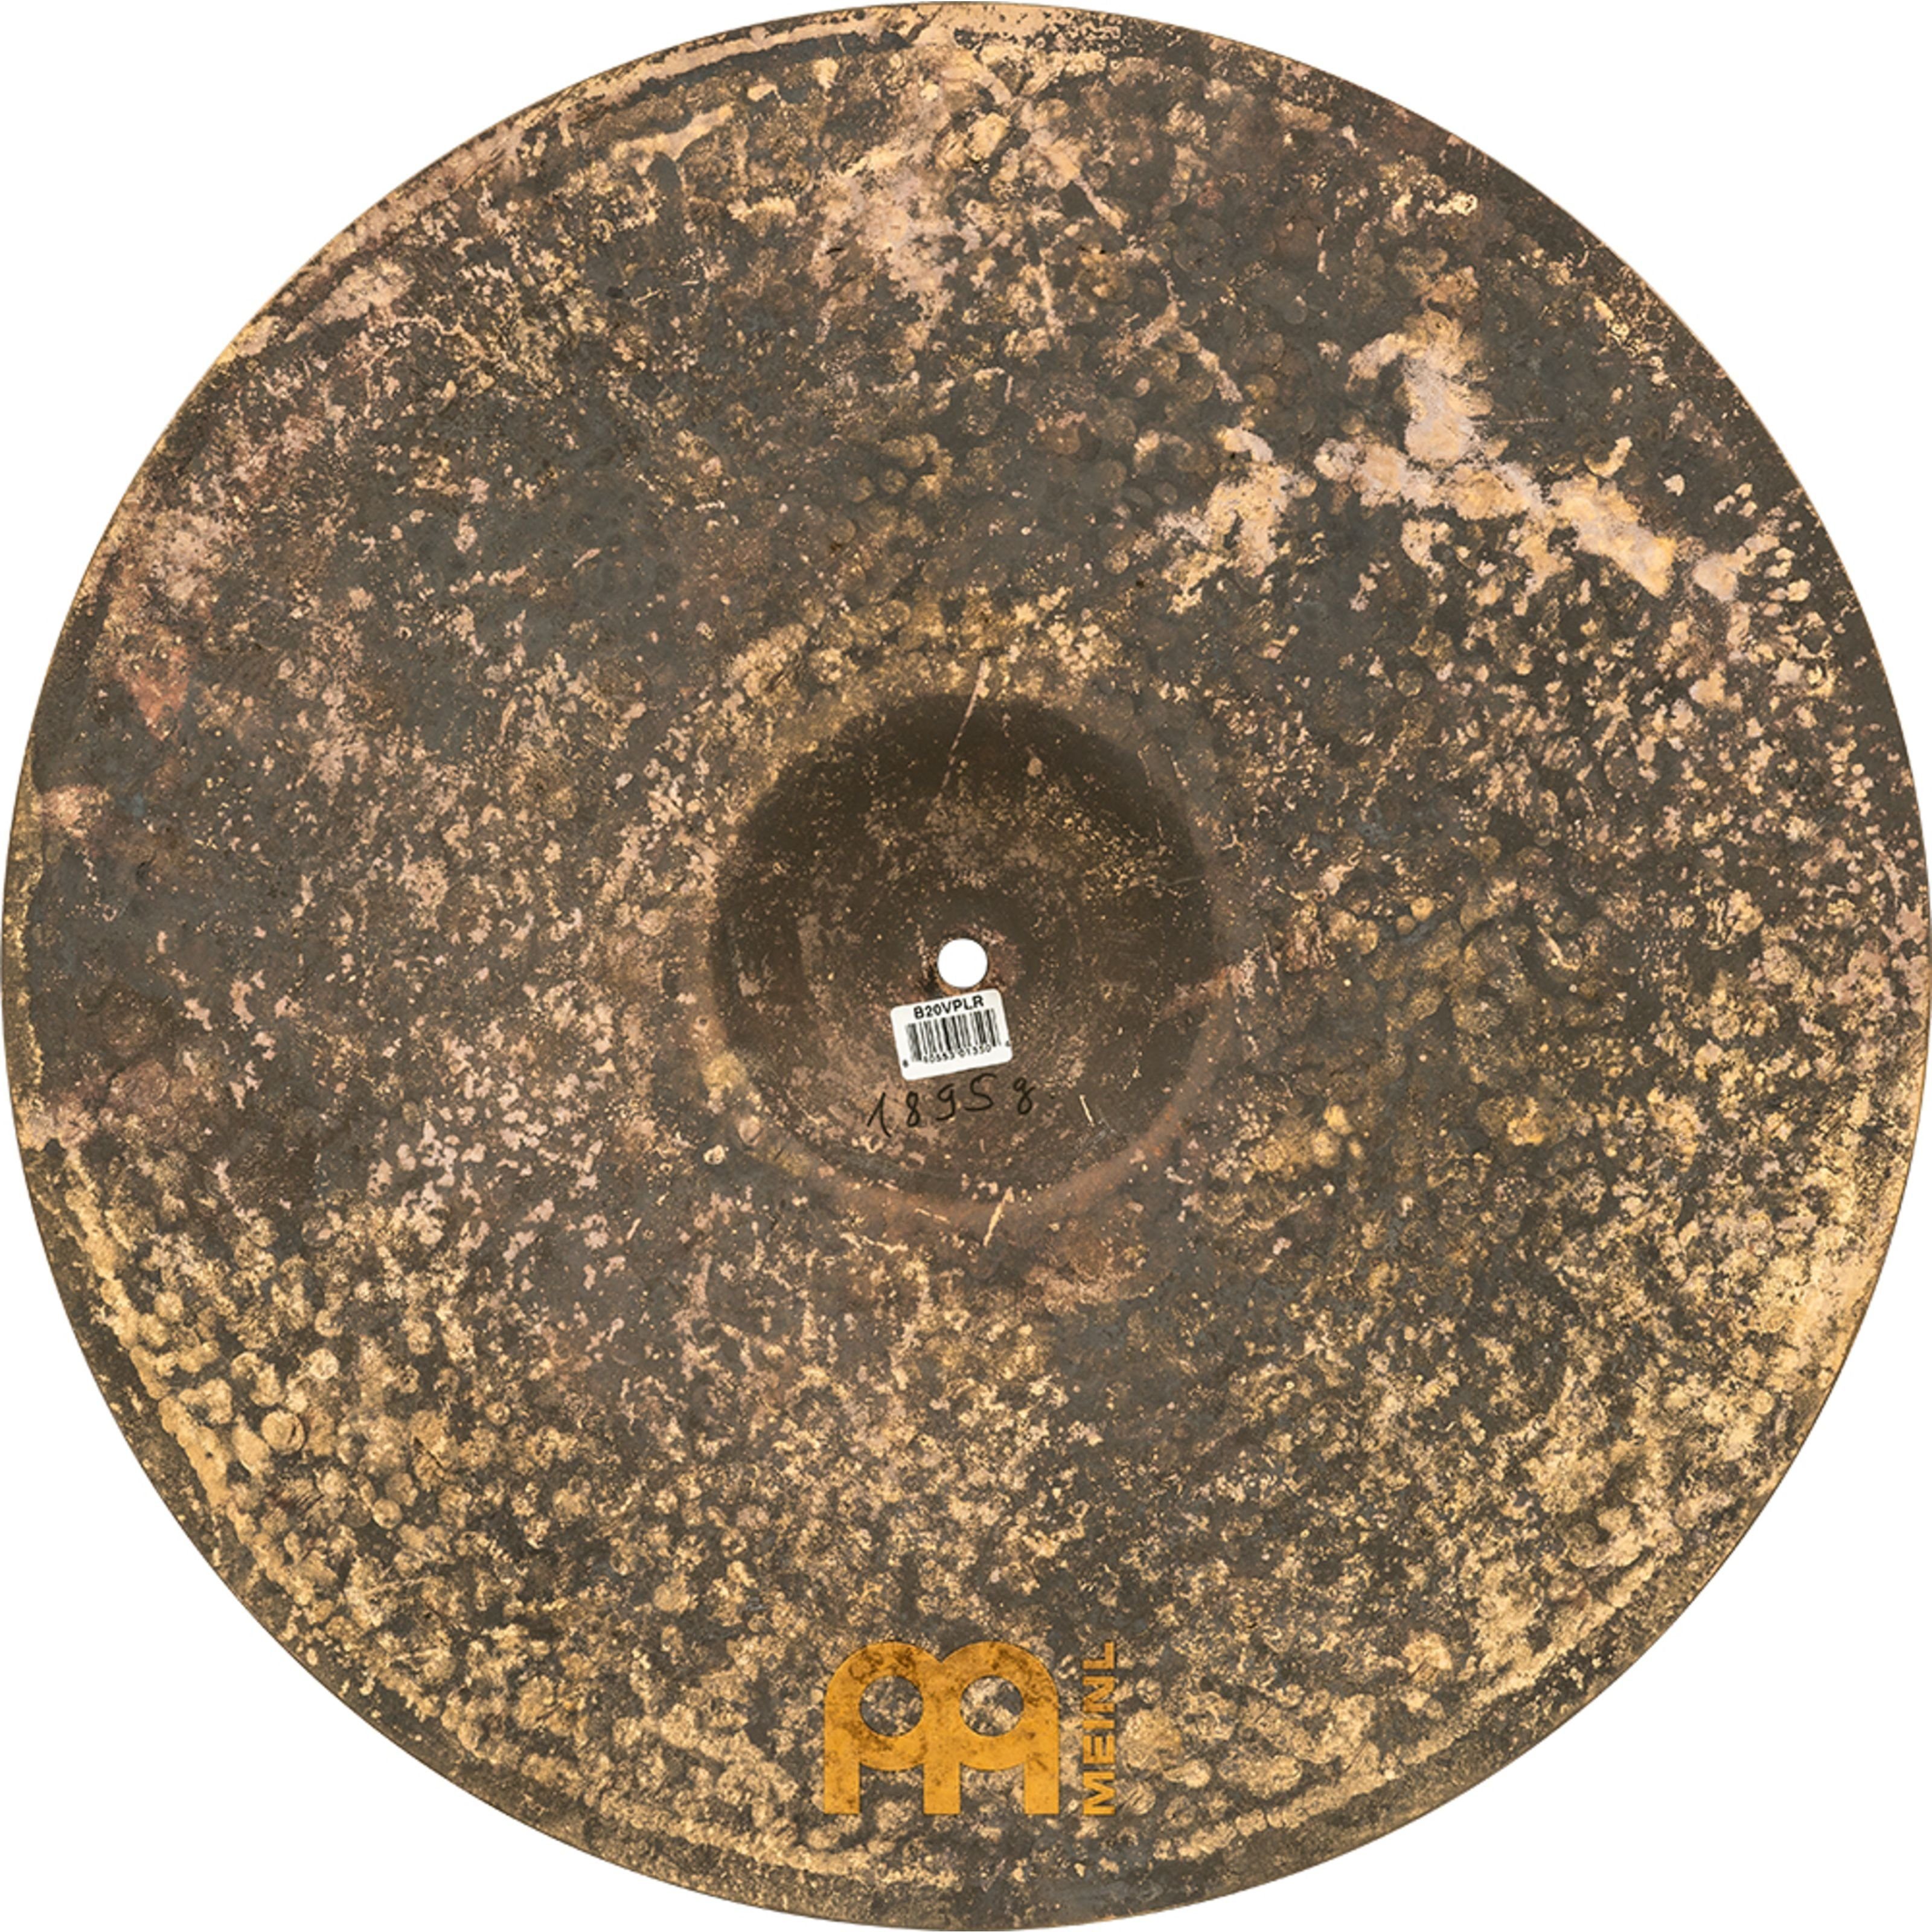 Spielzeug-Musikinstrument, Pure Ride - Vintage Cymbal Ride Percussion B20VPLR, 20", Byzance Meinl Light